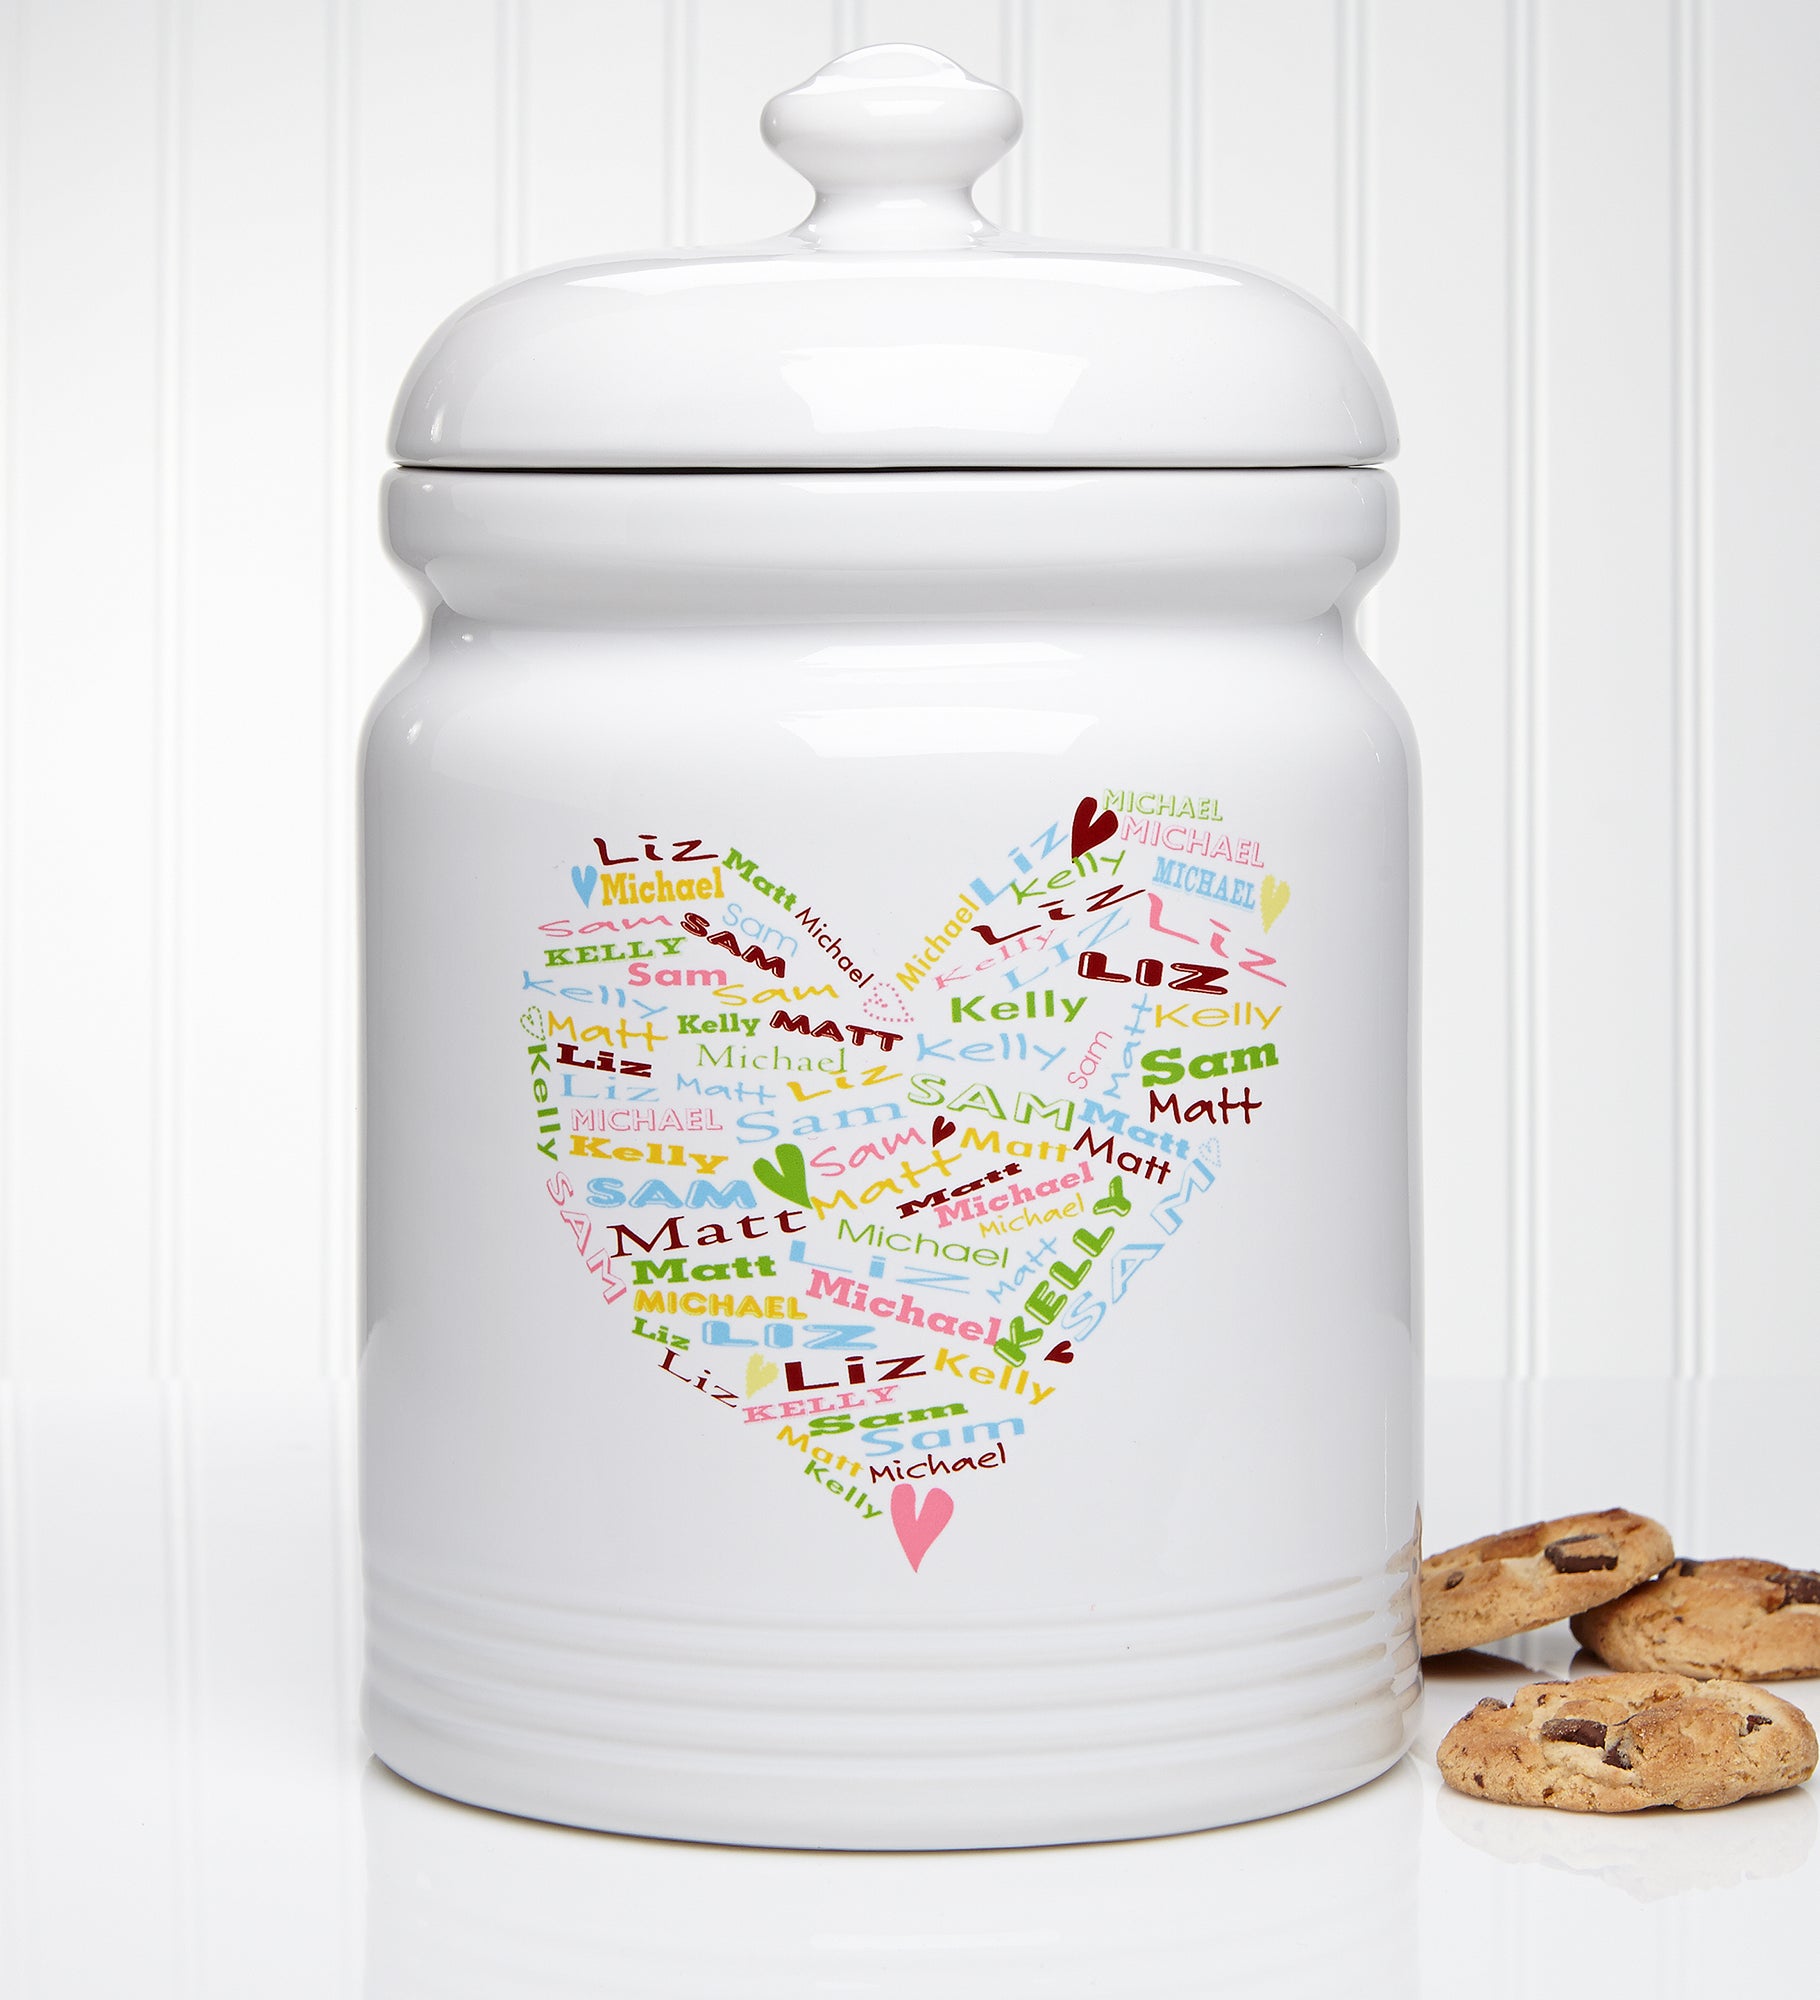 Personalized Cookie Jar for Grandma - Life is Sweeter - The